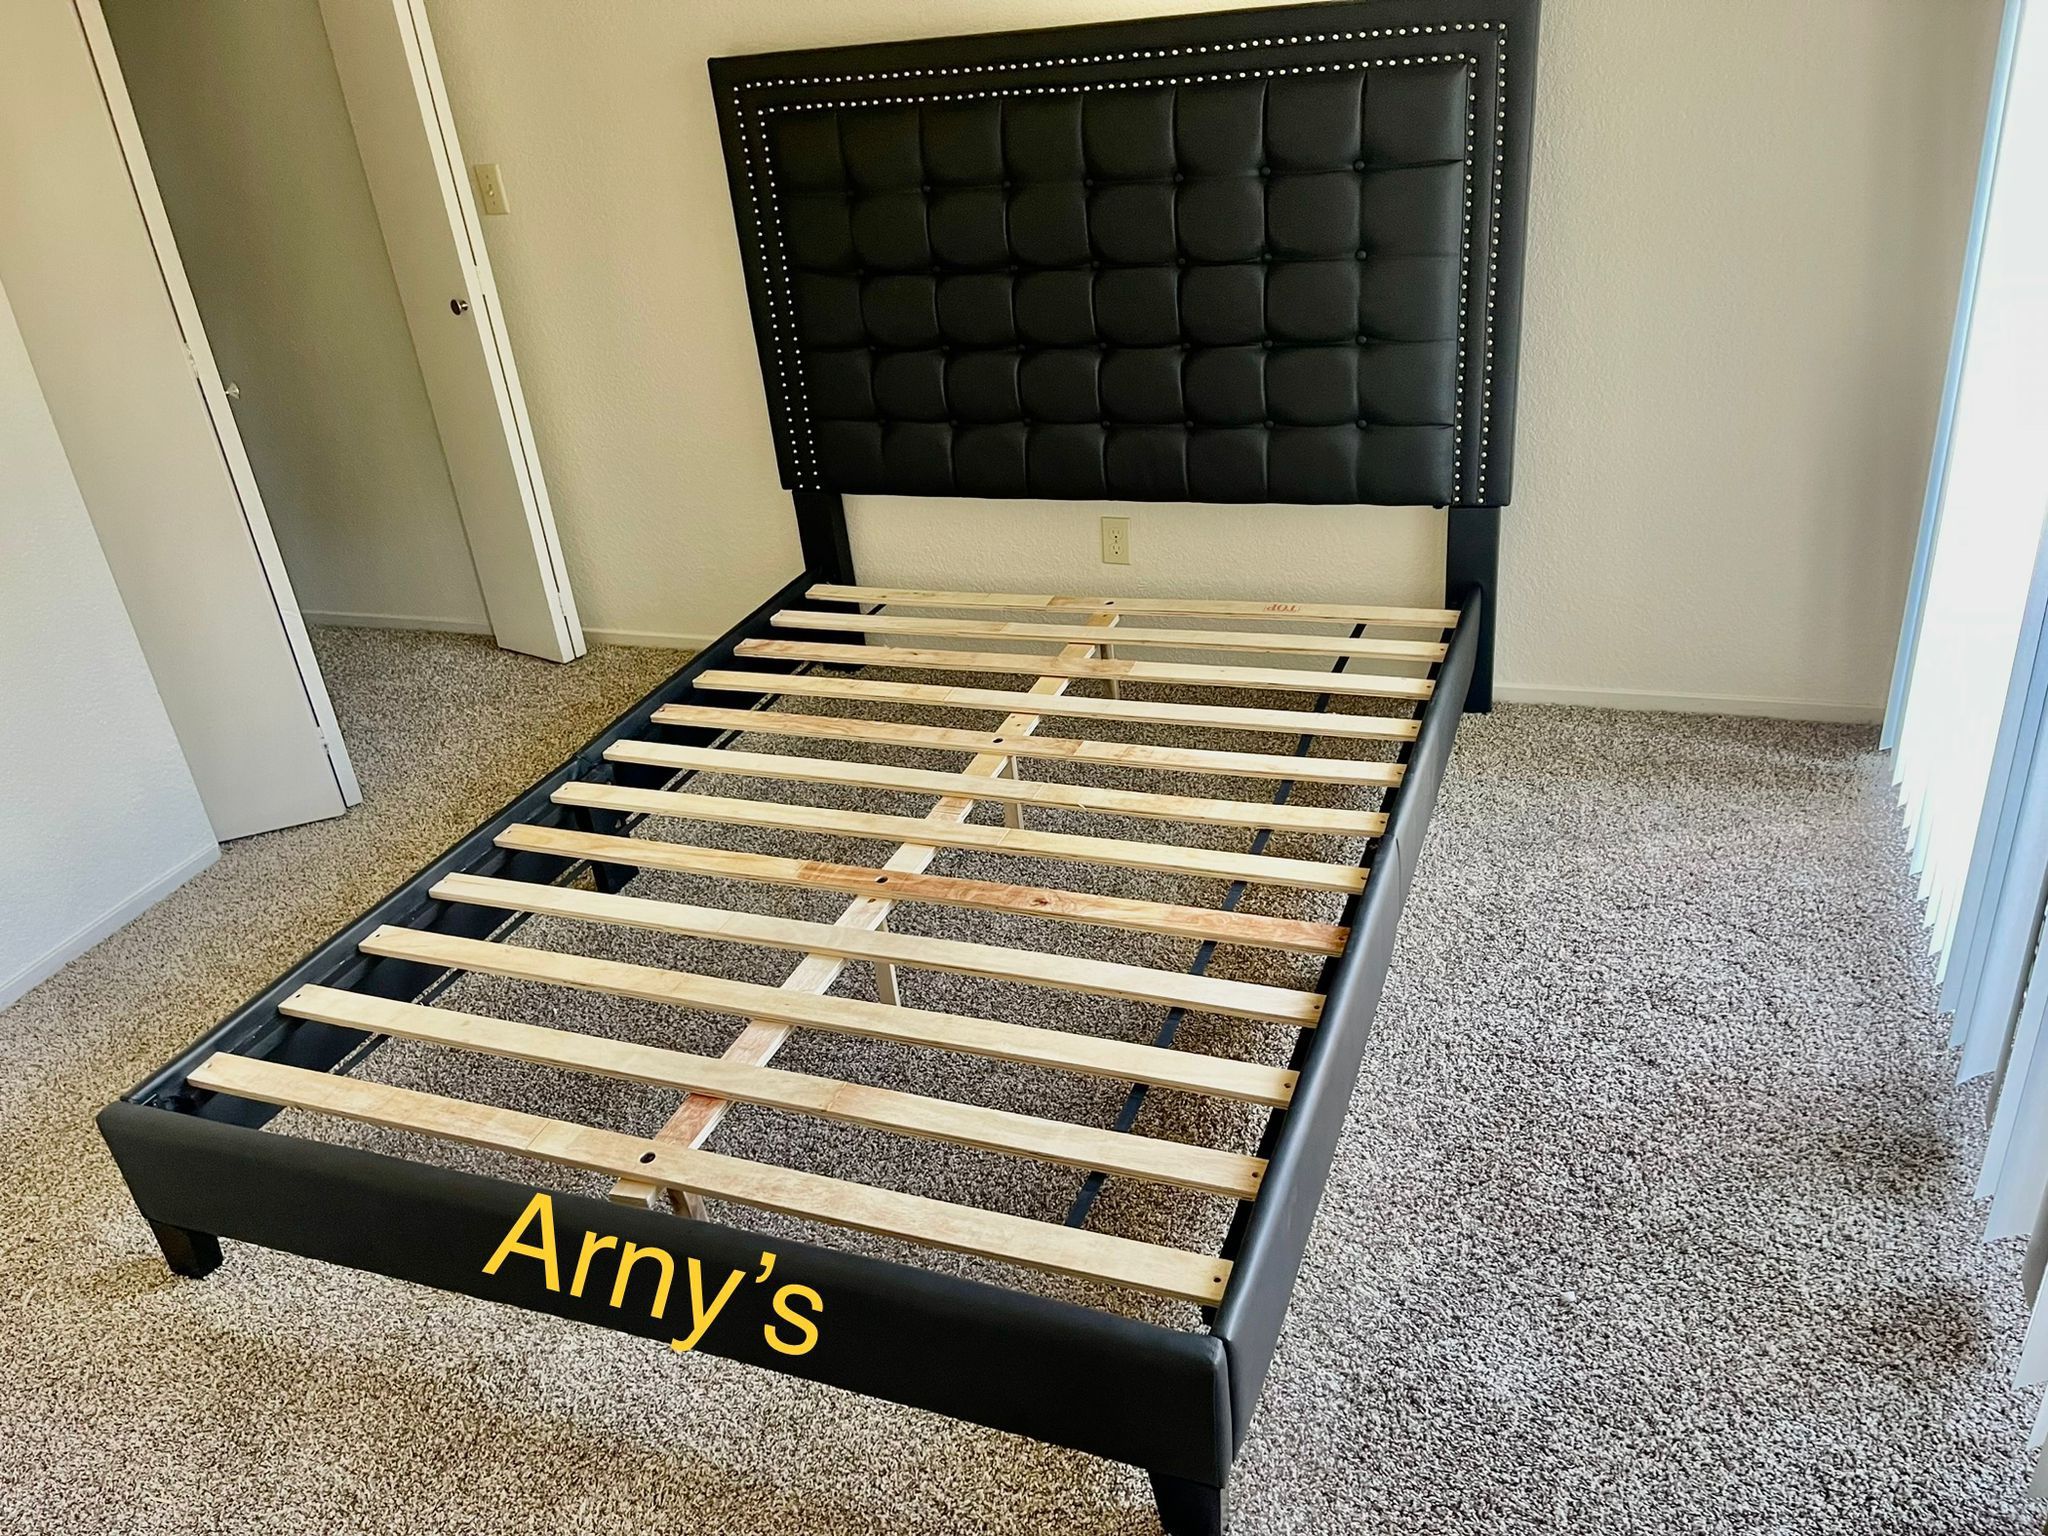 Full Size New Good Quality Bed With Nice Mattress Included 